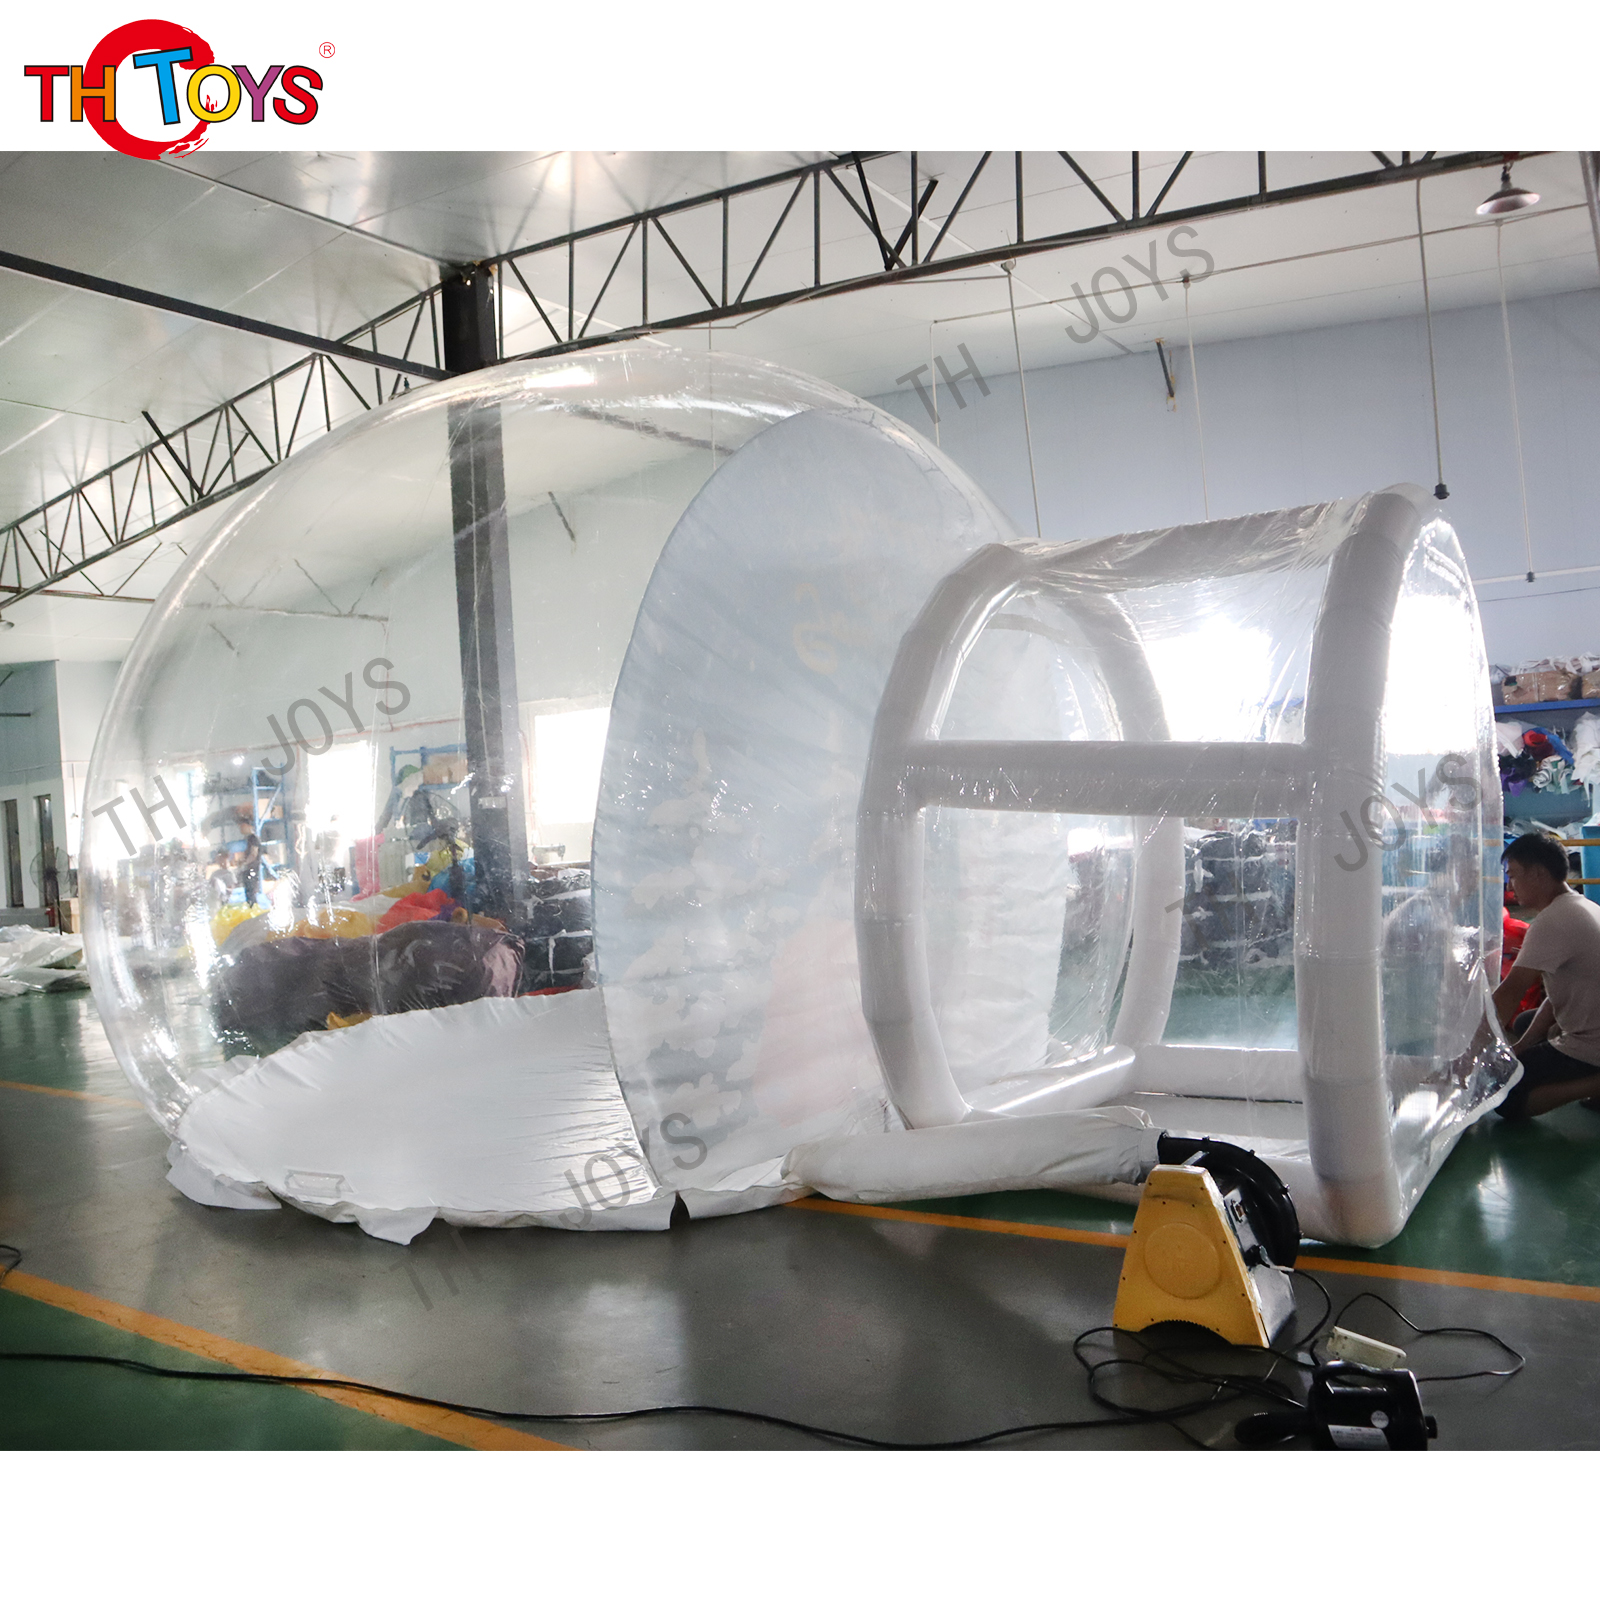 Inflatable Bubble Room-09